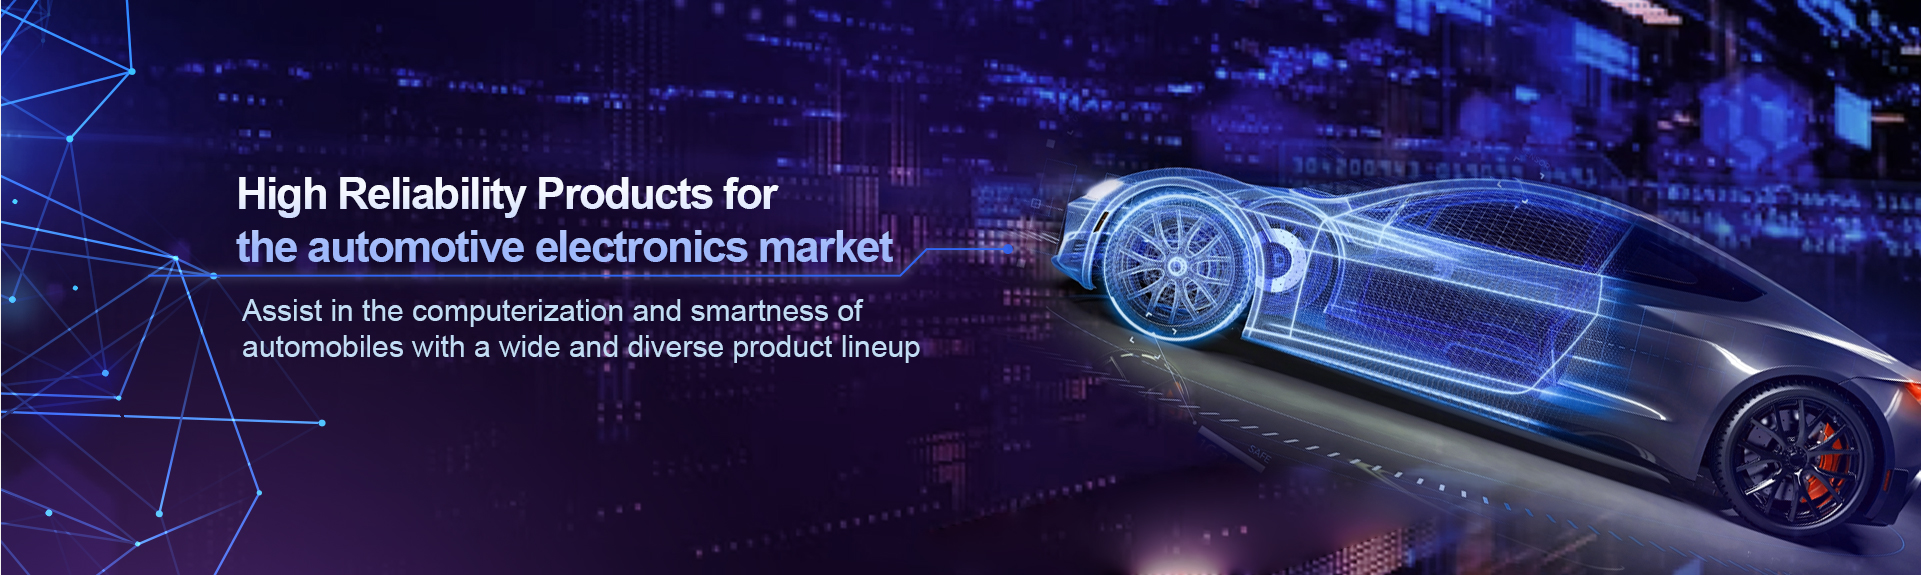 High Reliability Products for the automotive electronics market